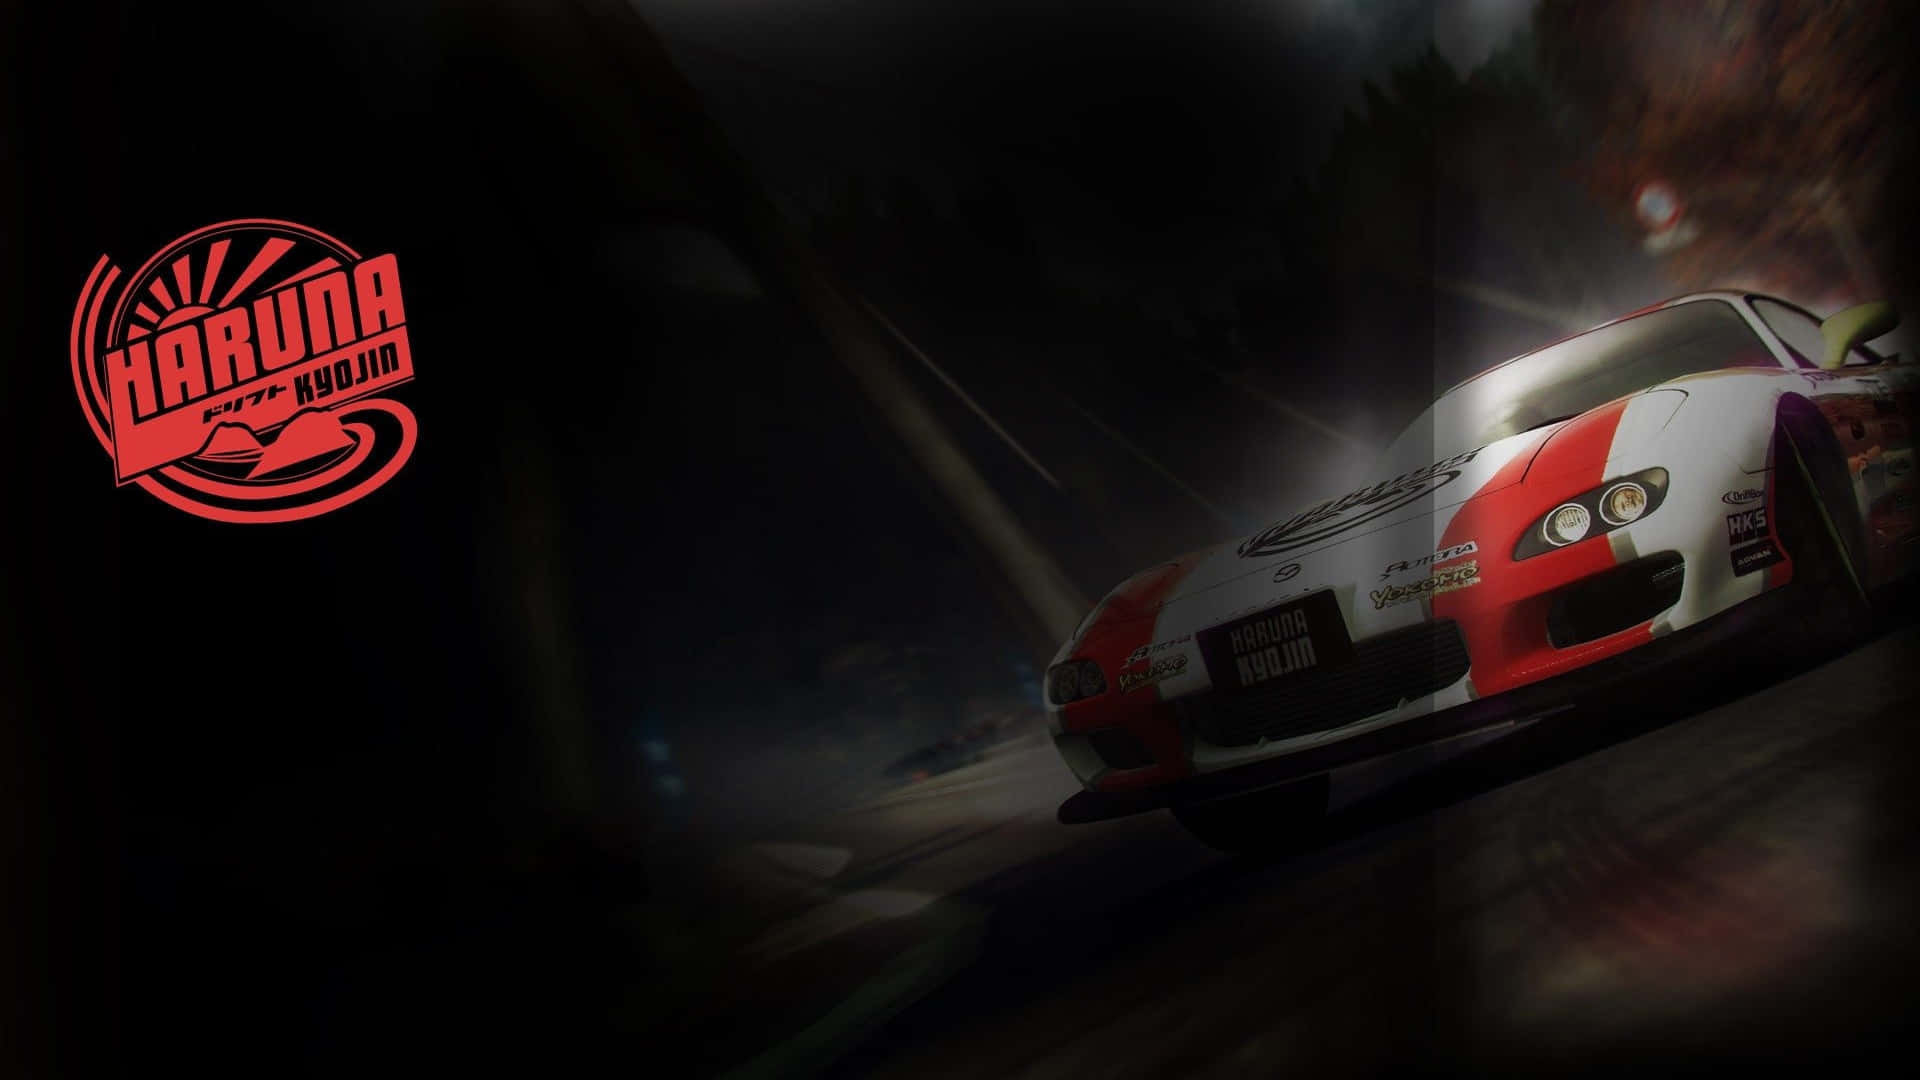 Hd Grid 2 Background White Race Car With Red Stripes